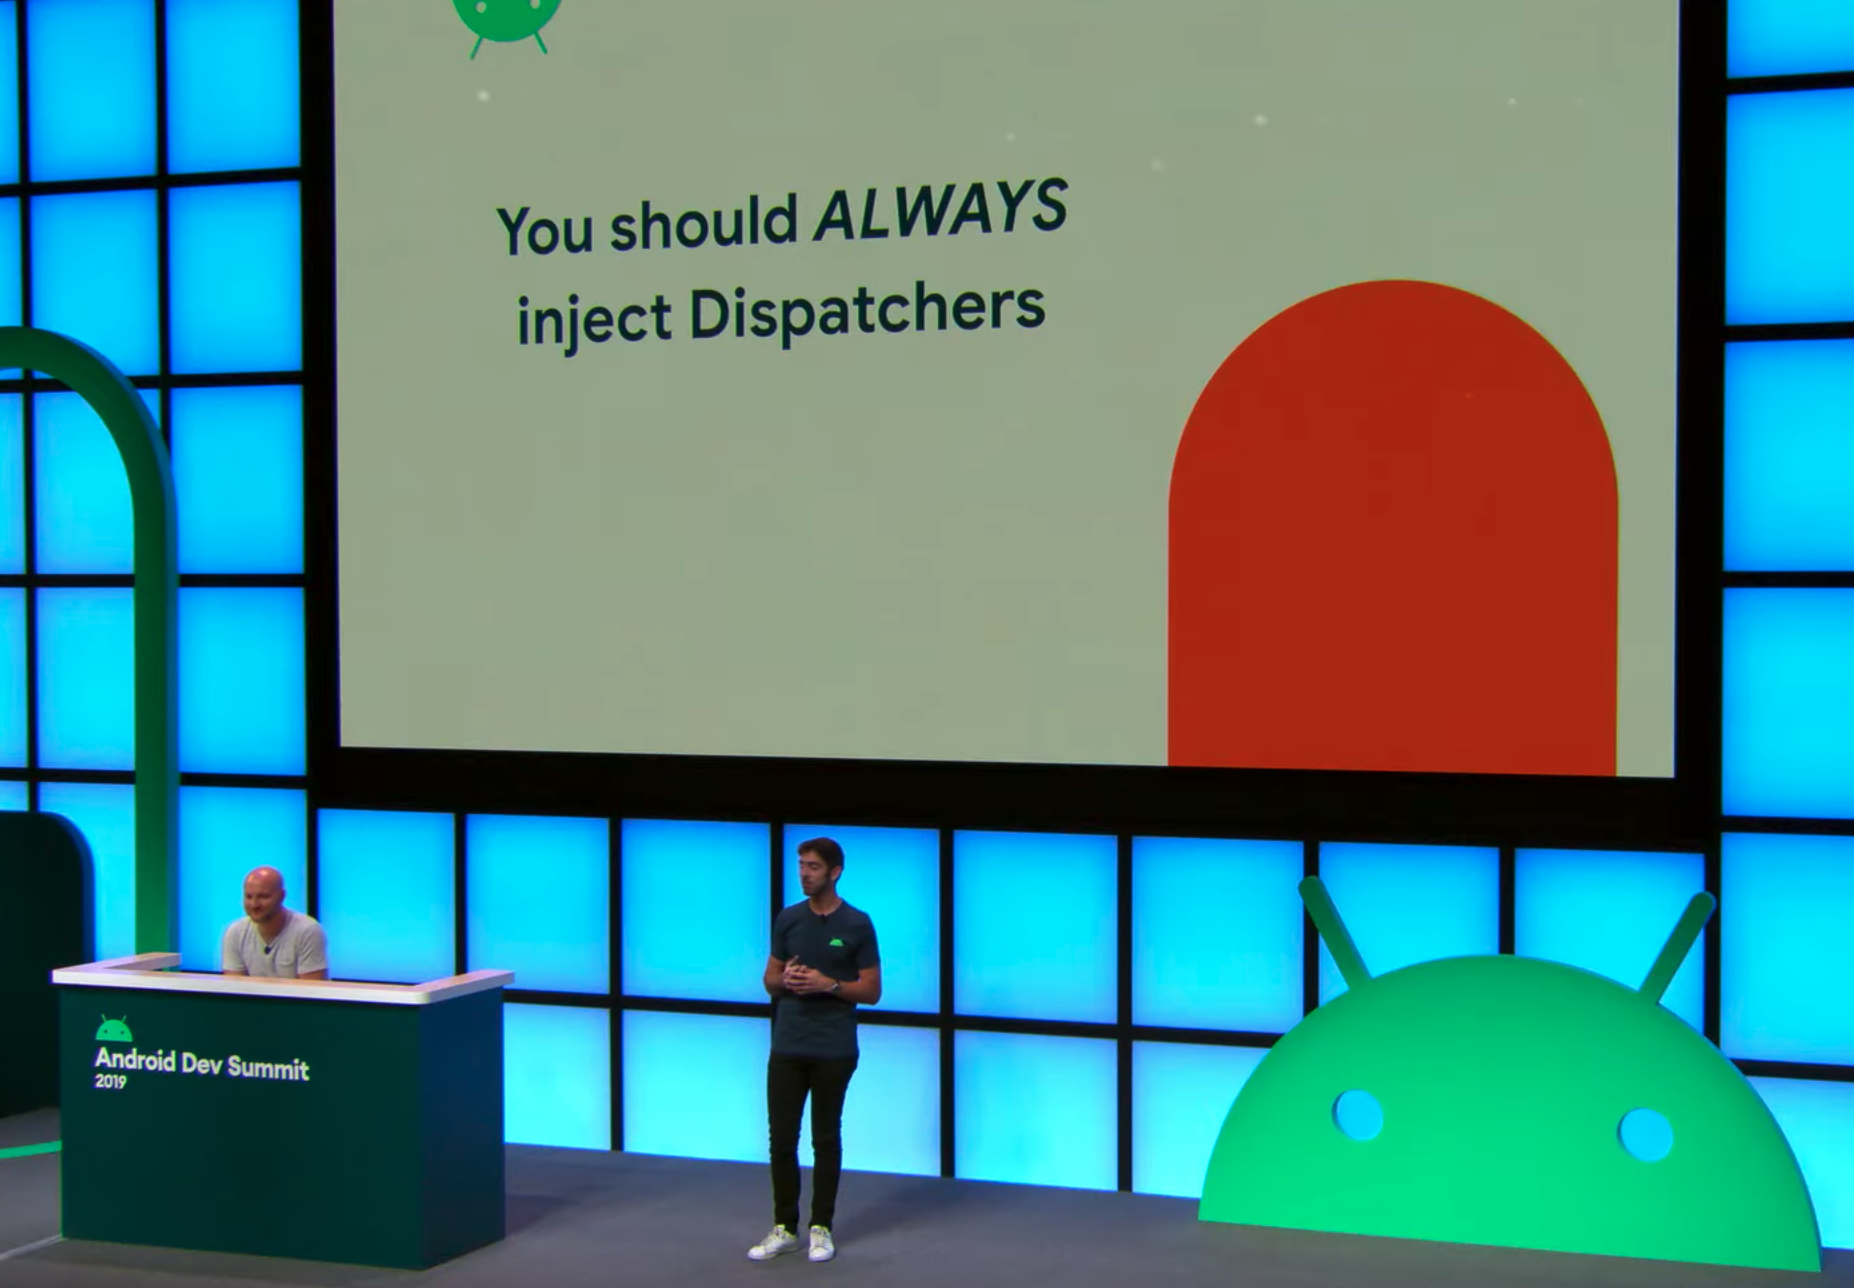 Image from Android Dev Summit 2019 showing a slide with "You should ALWAYS inject Dispatchers"